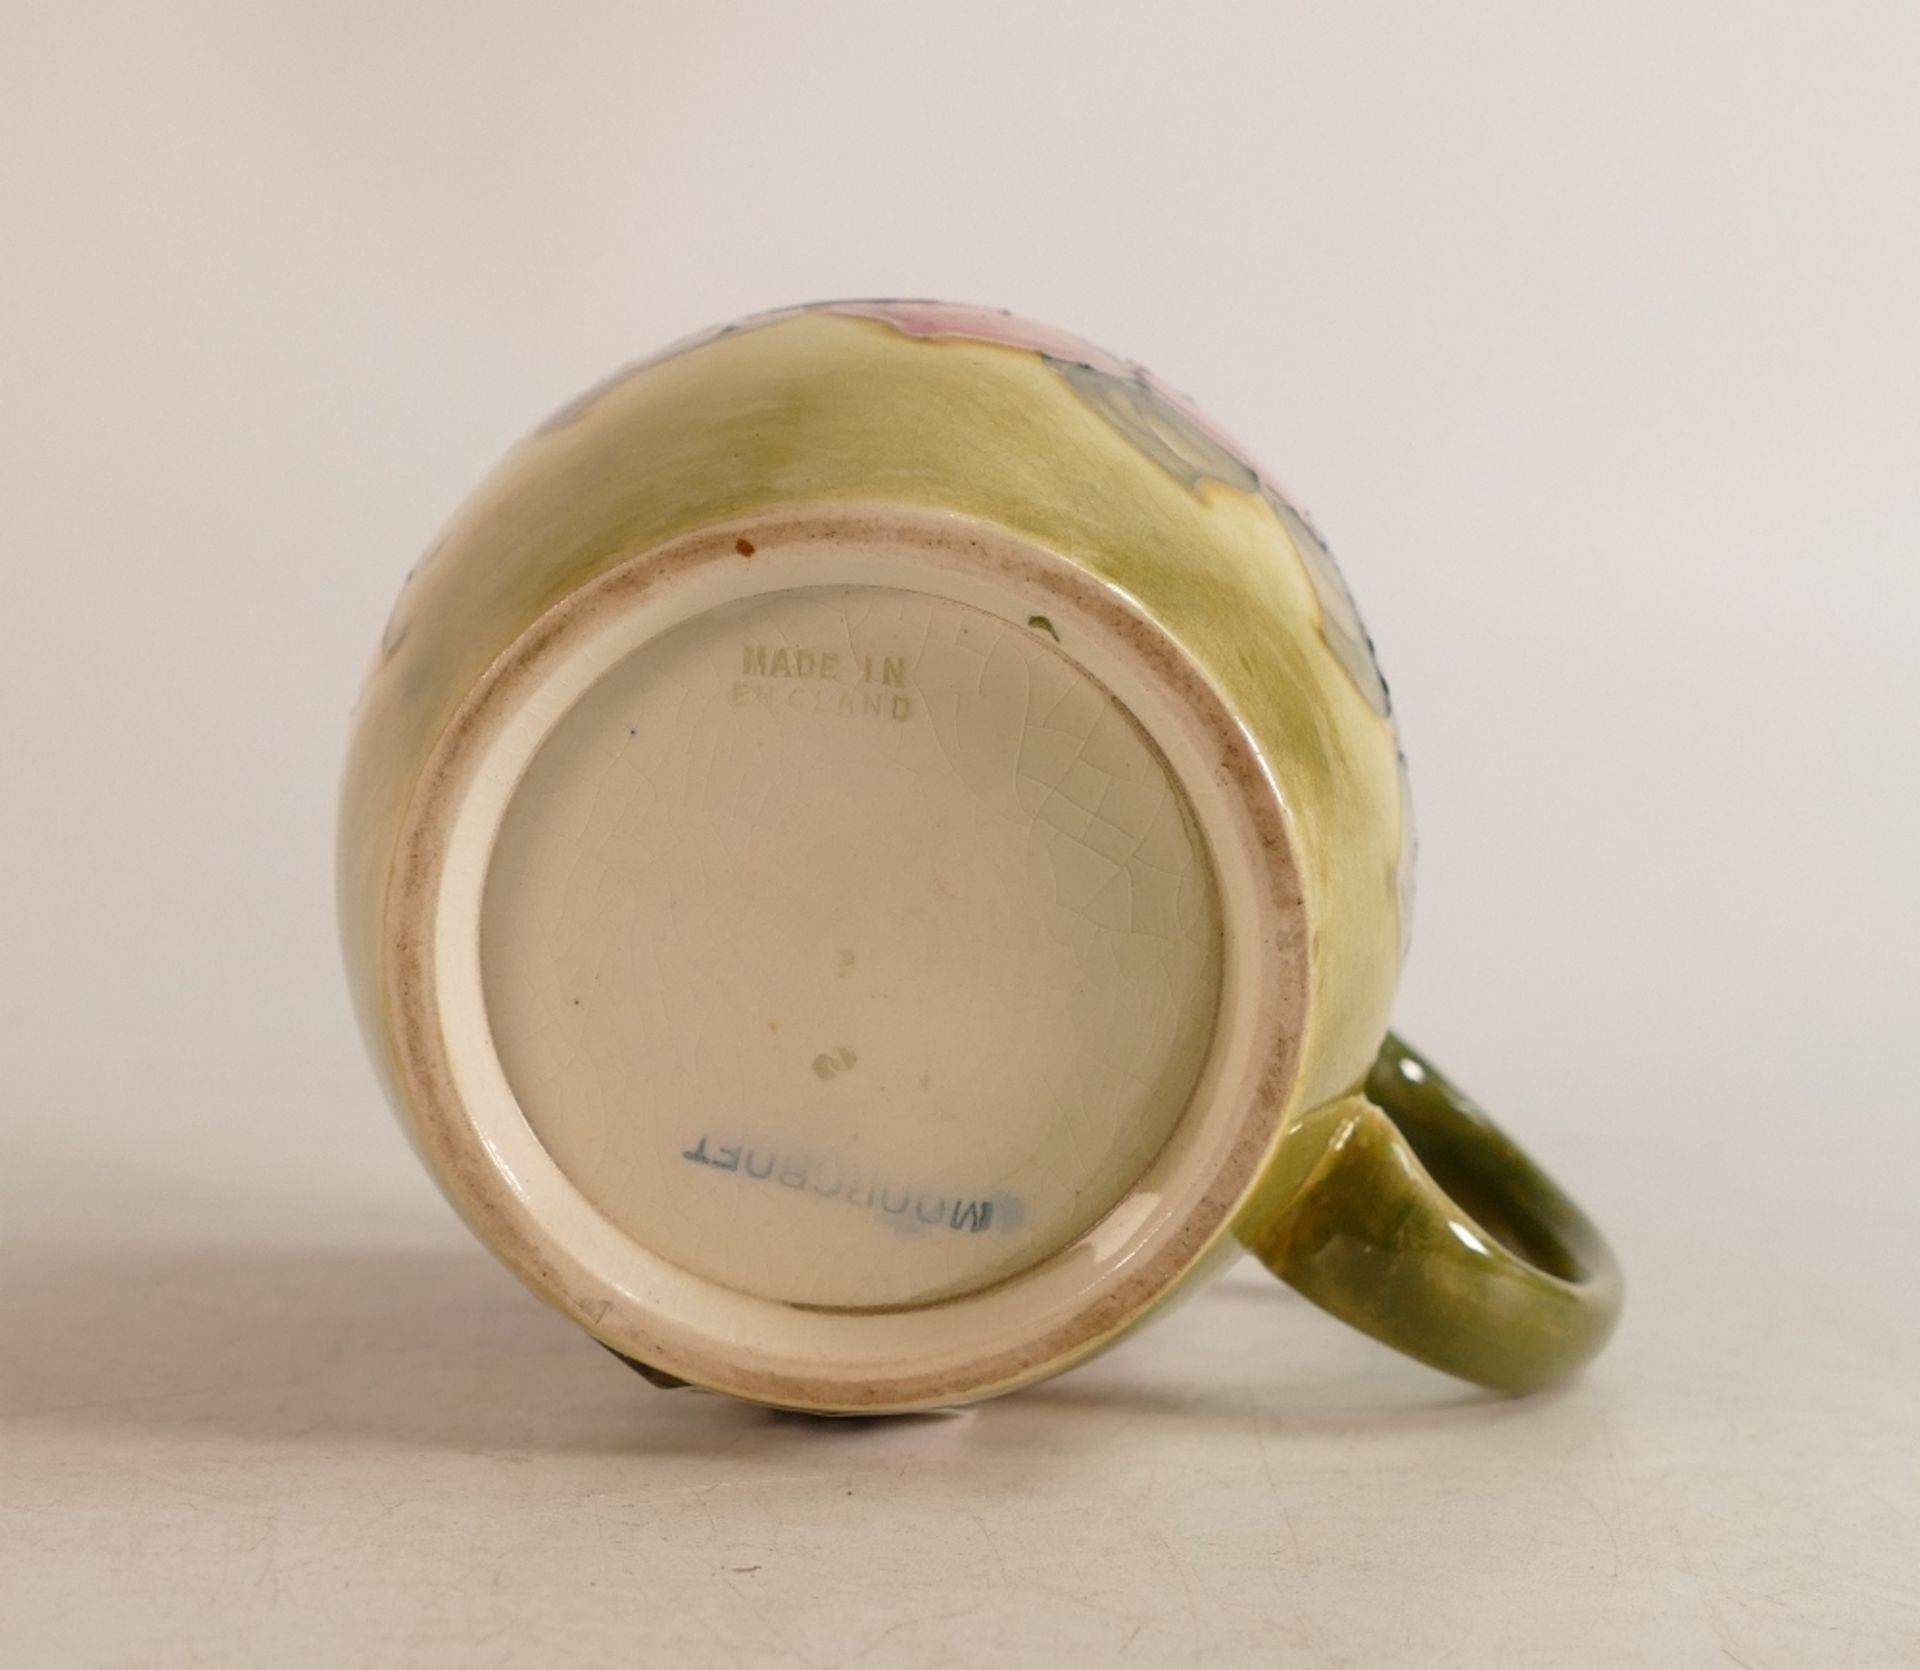 Moorcroft Clematis mug on faded yellow/green Background - Image 2 of 2